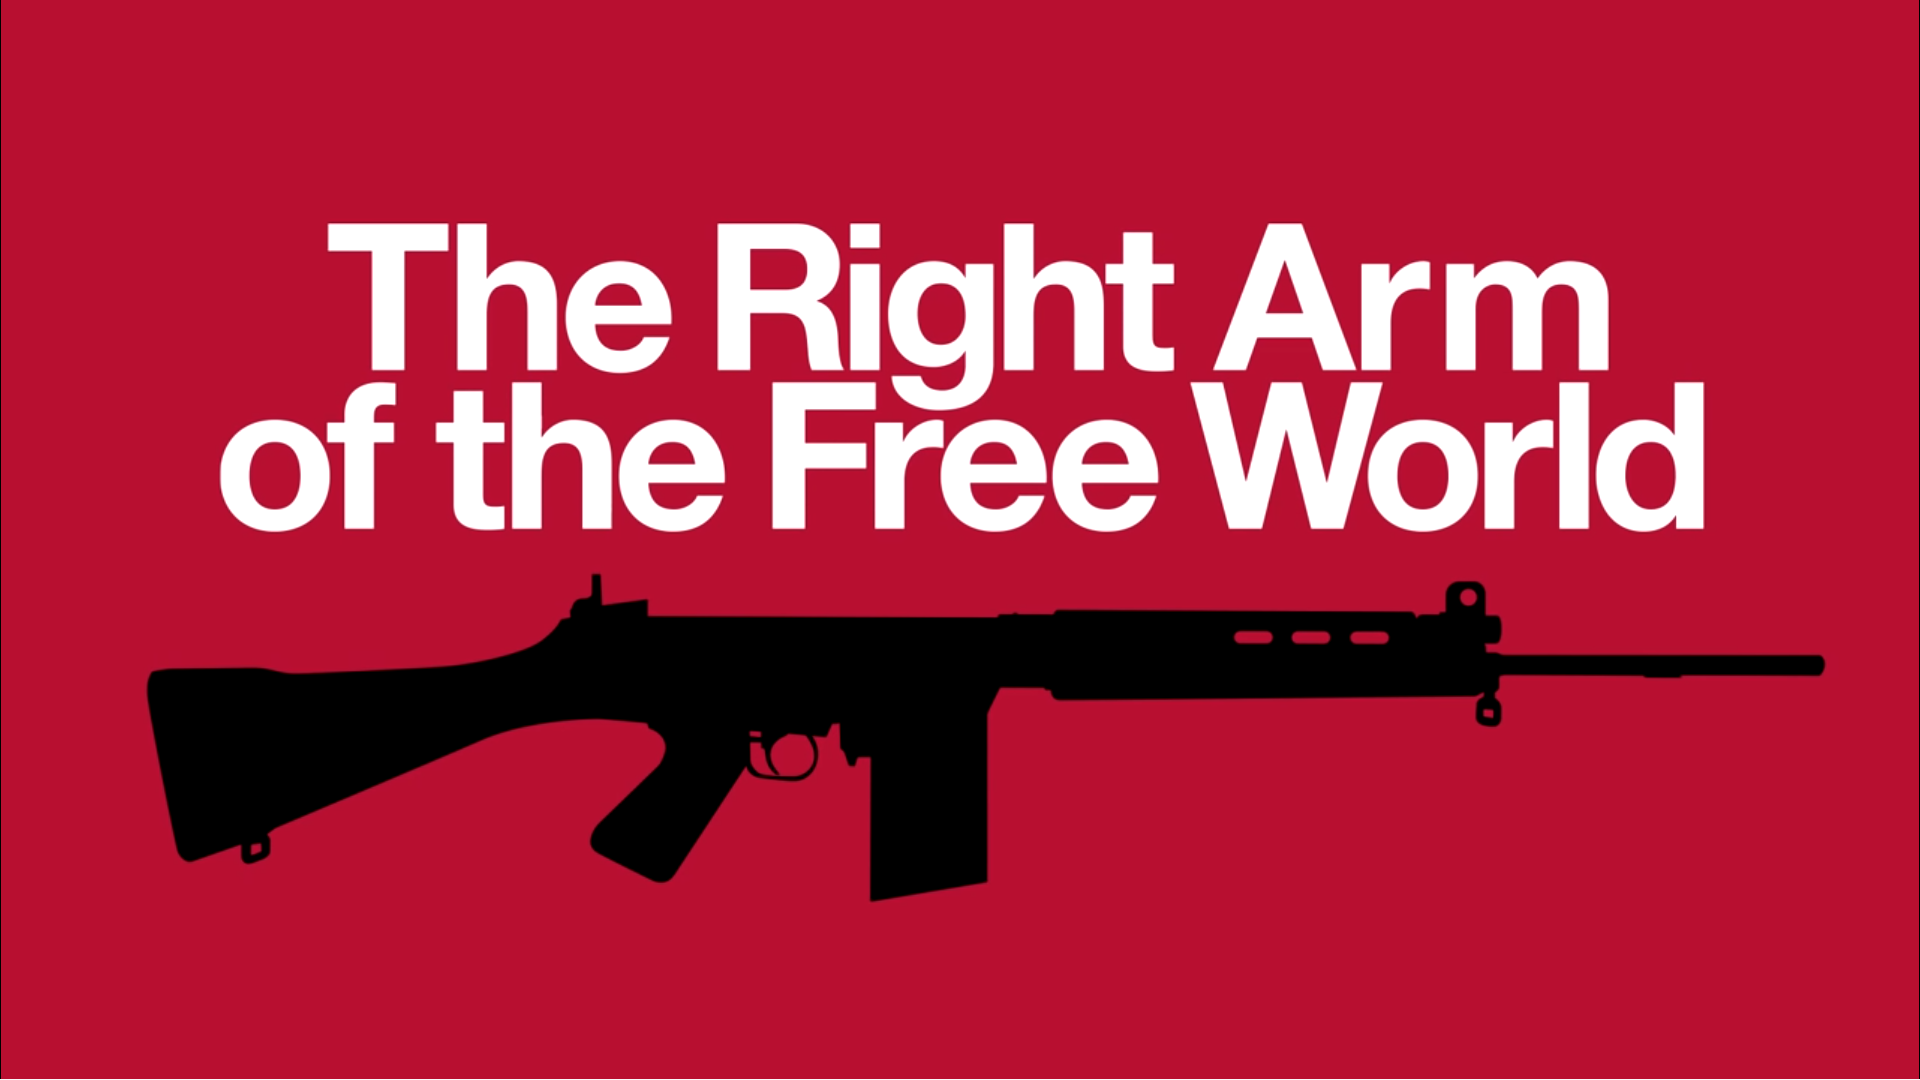 Right freedom. Right Arm.